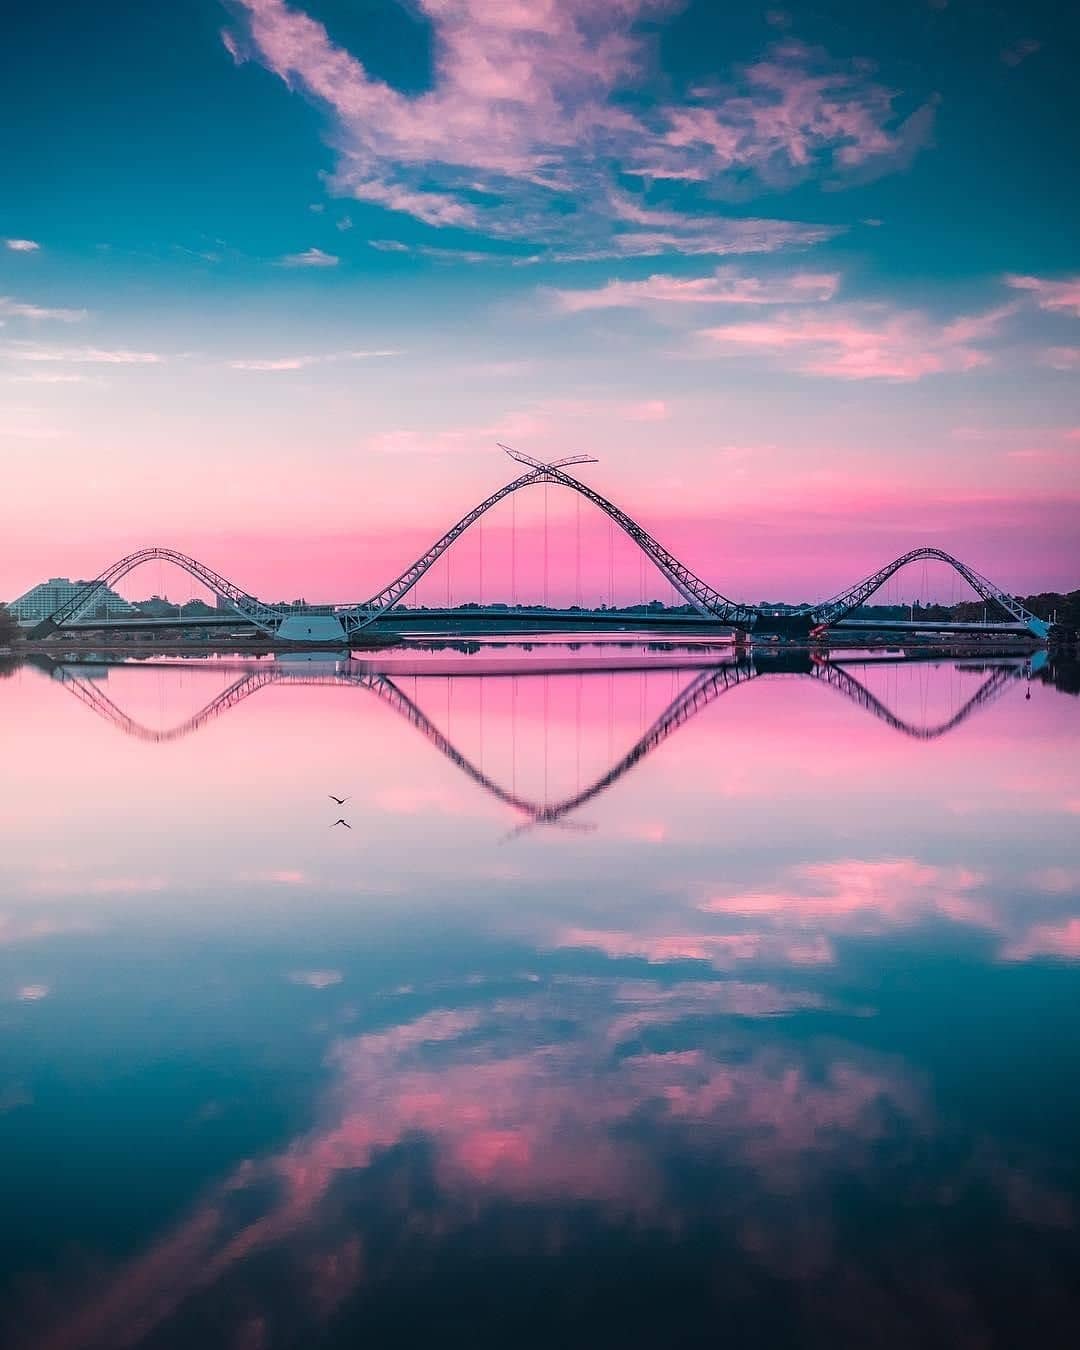 ▶@Regran_ed from @australia -  There’s a new bridge making waves in @destinationperth 🌉 @phlyimages perfectly captured the photogenic #MatagarupBridge, which opened in July and crosses over the #SwanRiver, connecting the #Perth CBD to Burswood and leading to the @optusstadium. Explore the city on foot and do the bridge loop, which not only has great views, but also ticks off your cardio for the day (meaning you can eat out at even more of Perth’s delicious eateries, of course!) #seeaustralia #justanotherdayinwa #seeperth #travel #architecture - #regrann